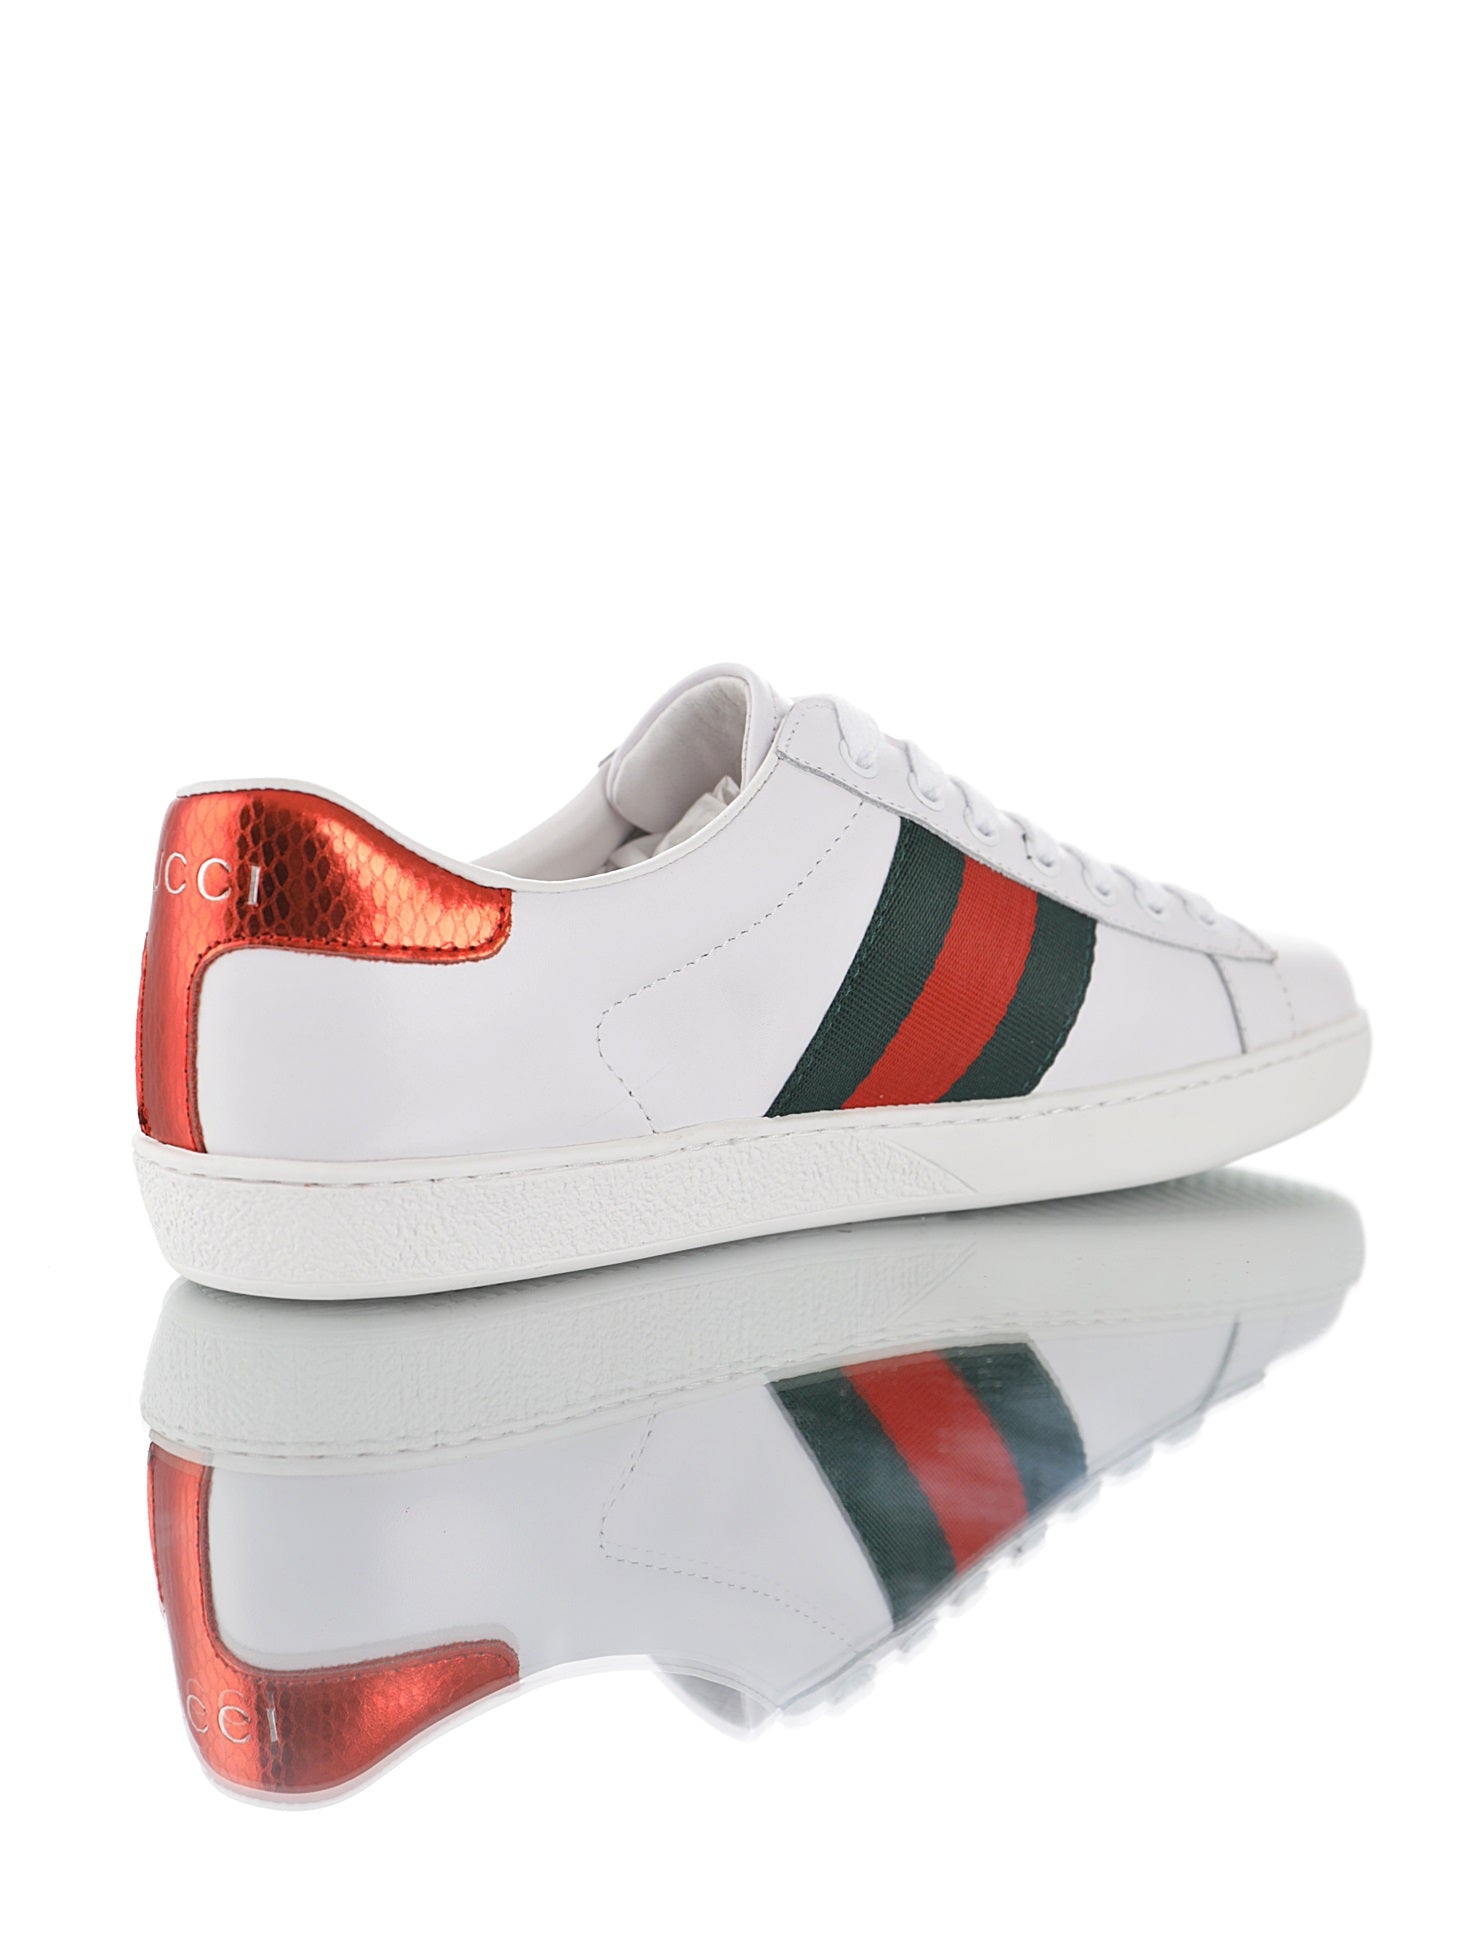 Gucci Ace embroidered sneaker 431942 